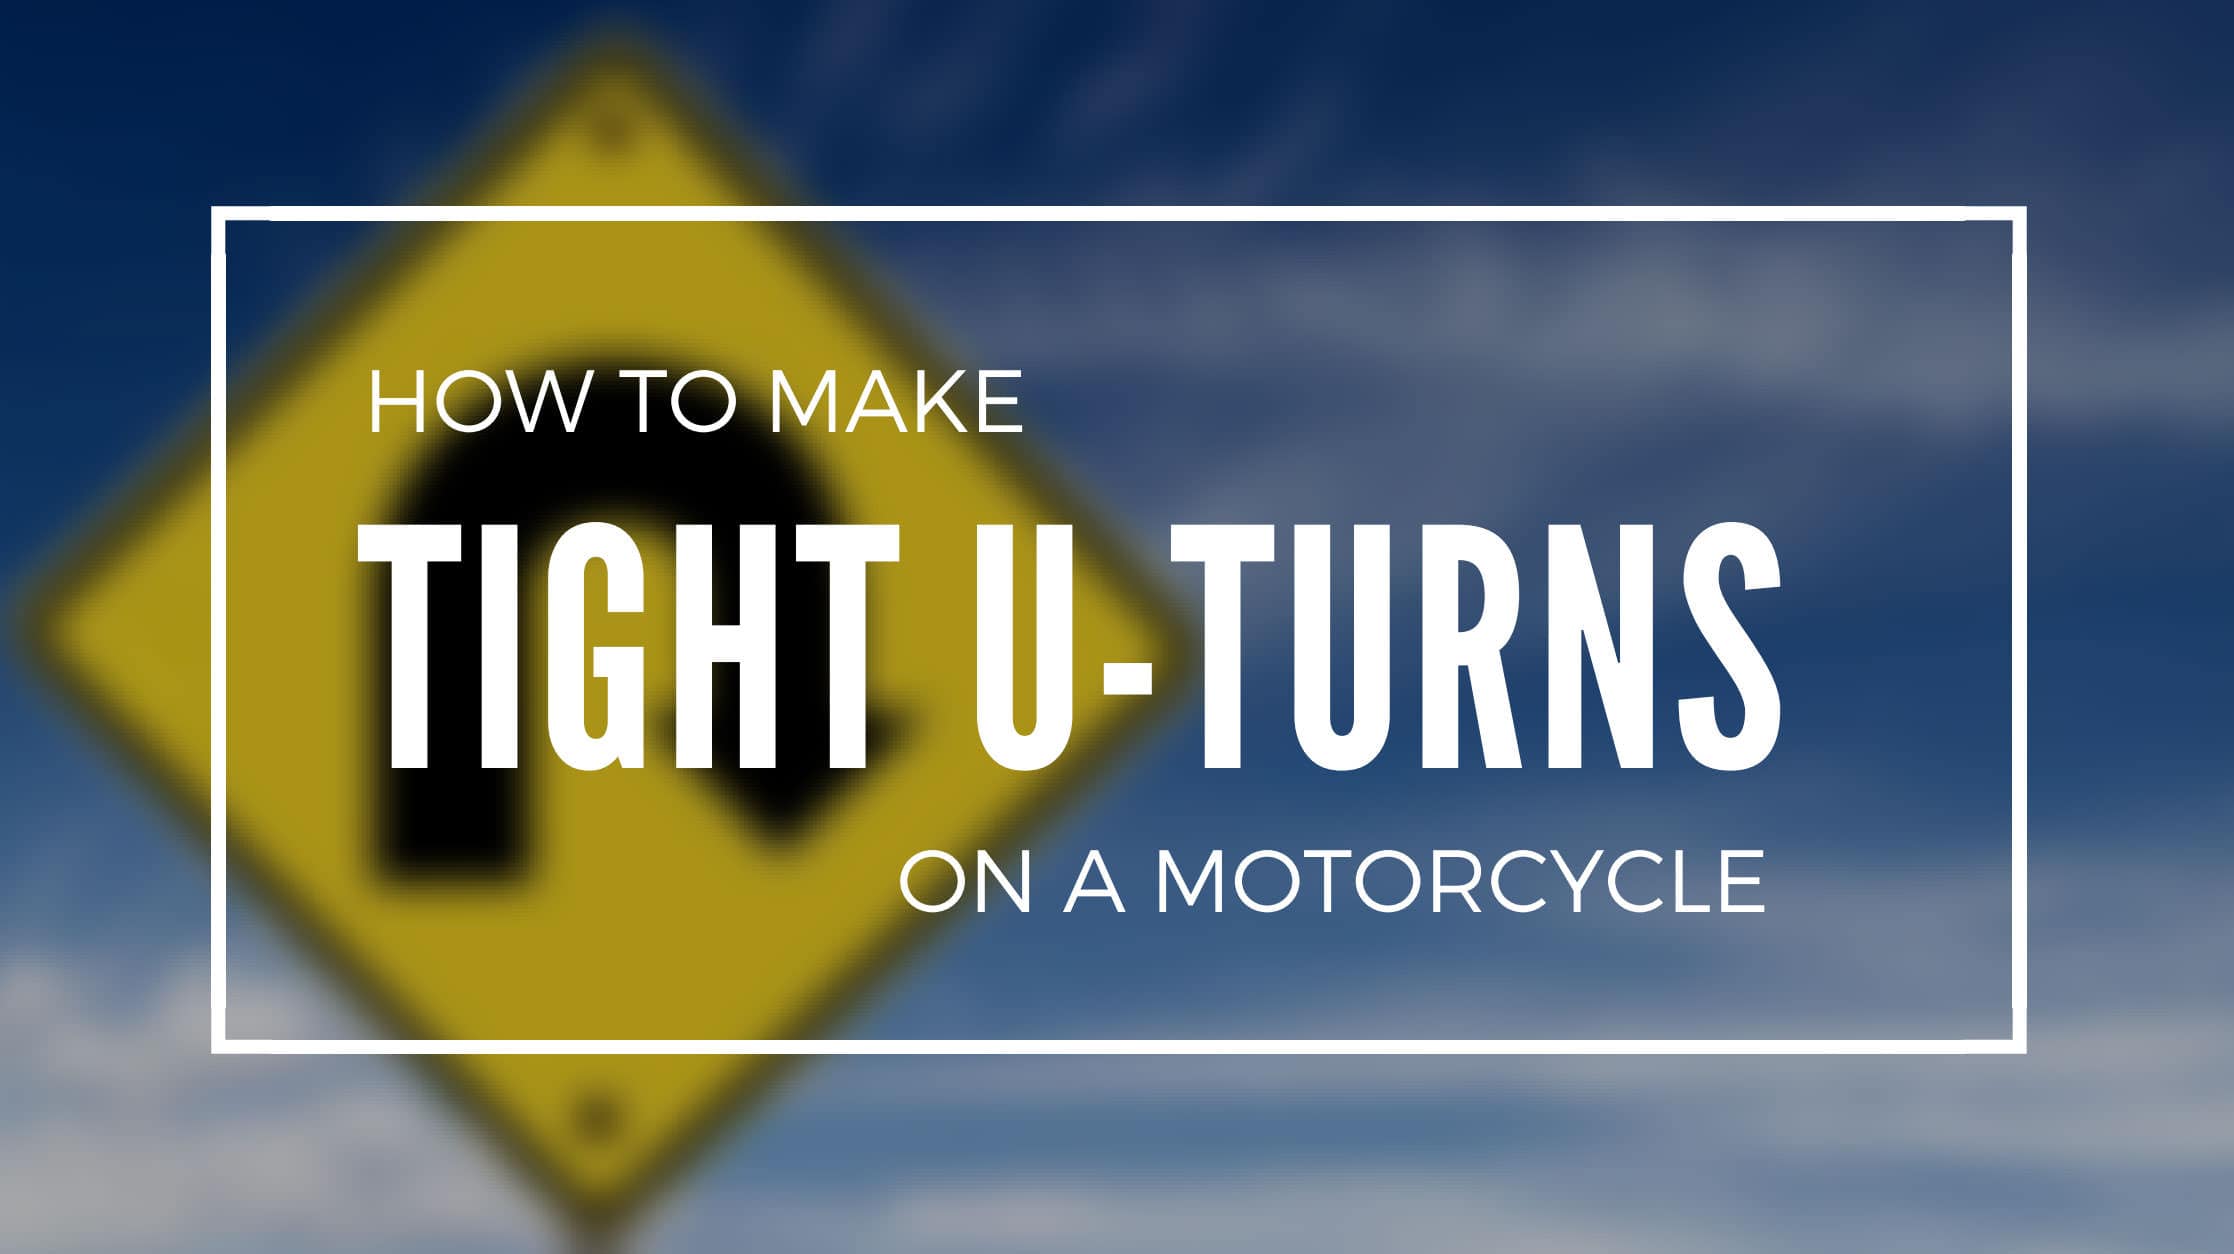 How to Make a Tight U-Turn on a Motorcycle